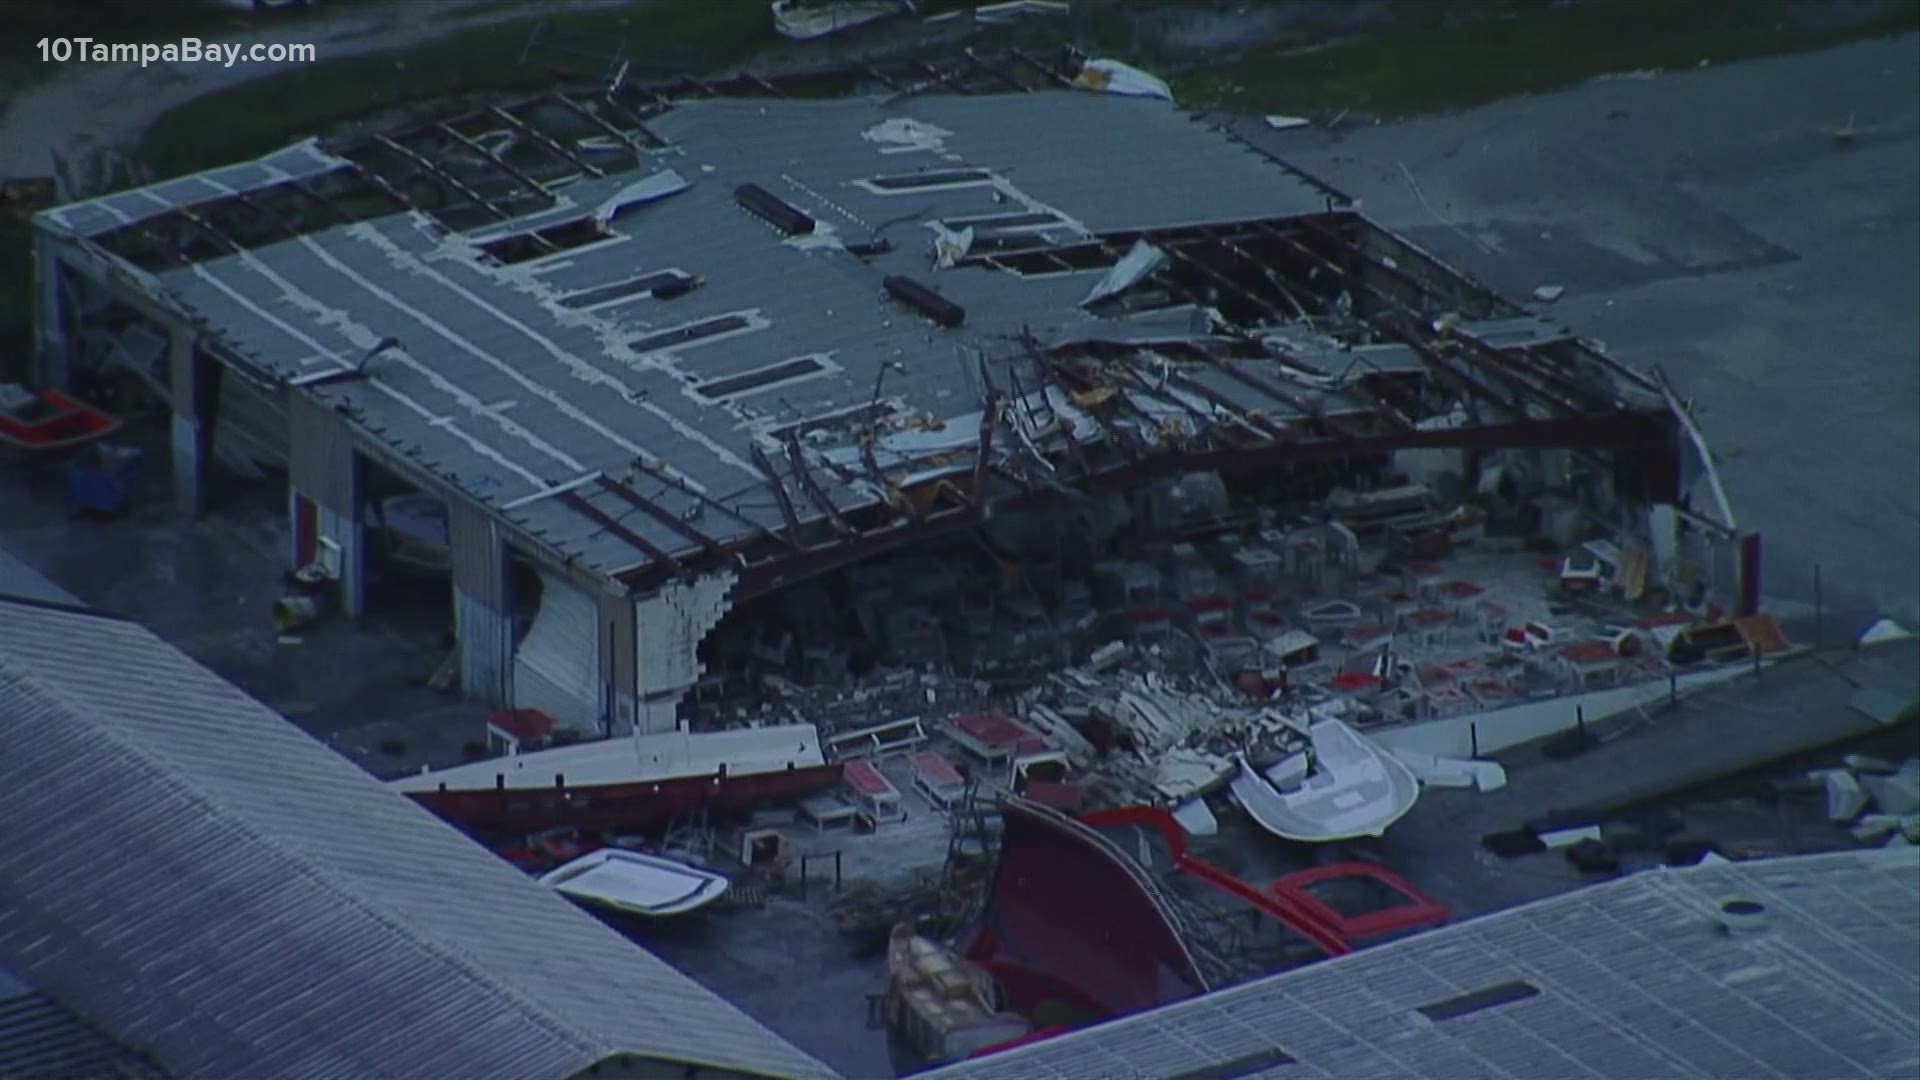 Scenes from Sky10 near Bryan Dairy Road and 66th Street show several buildings with roofs torn off and debris and boats thrown about.